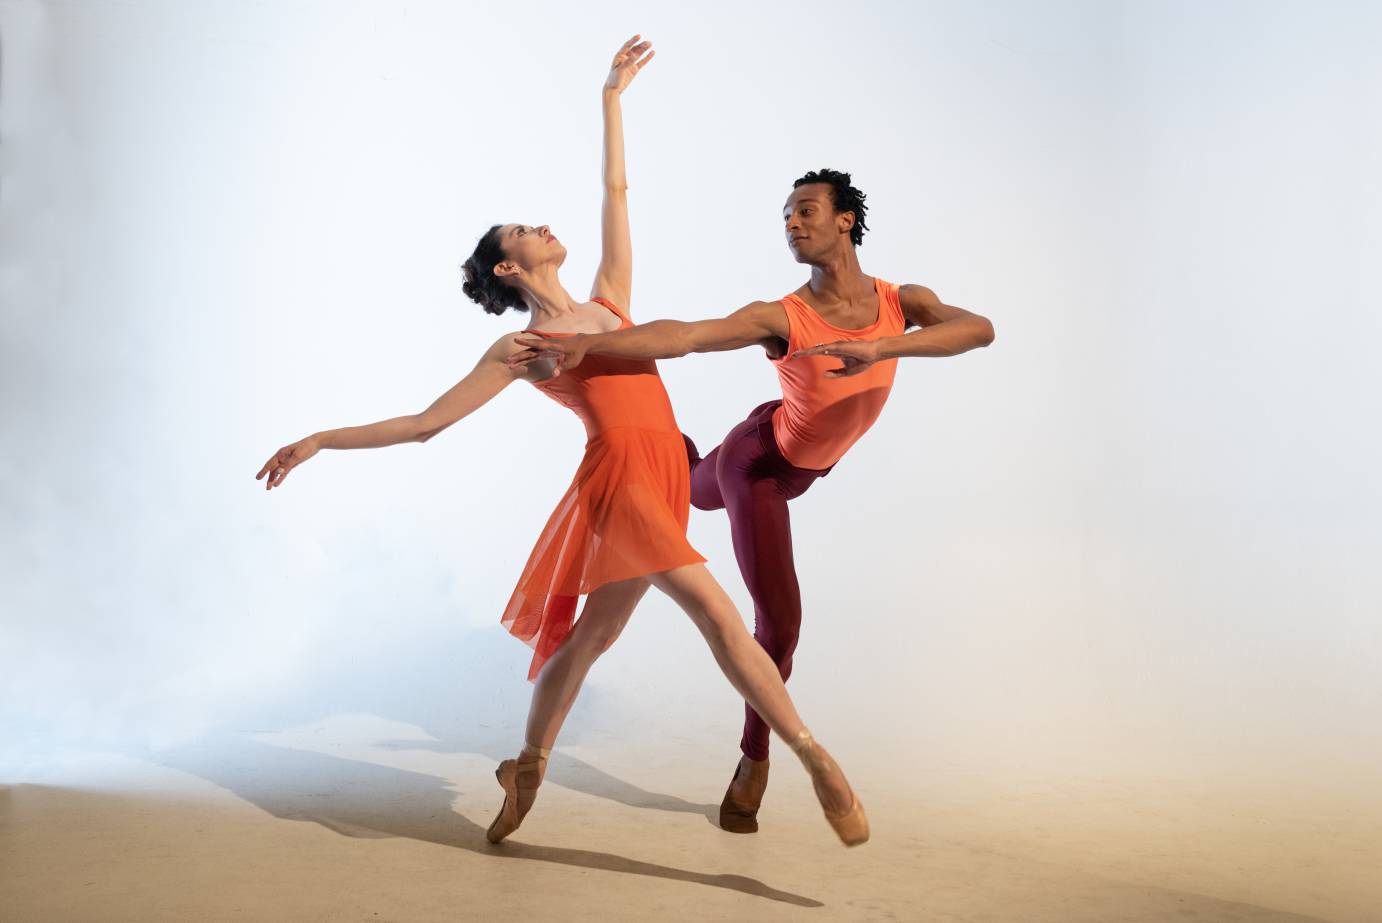 A man and a woman in orange extend into balletic positions